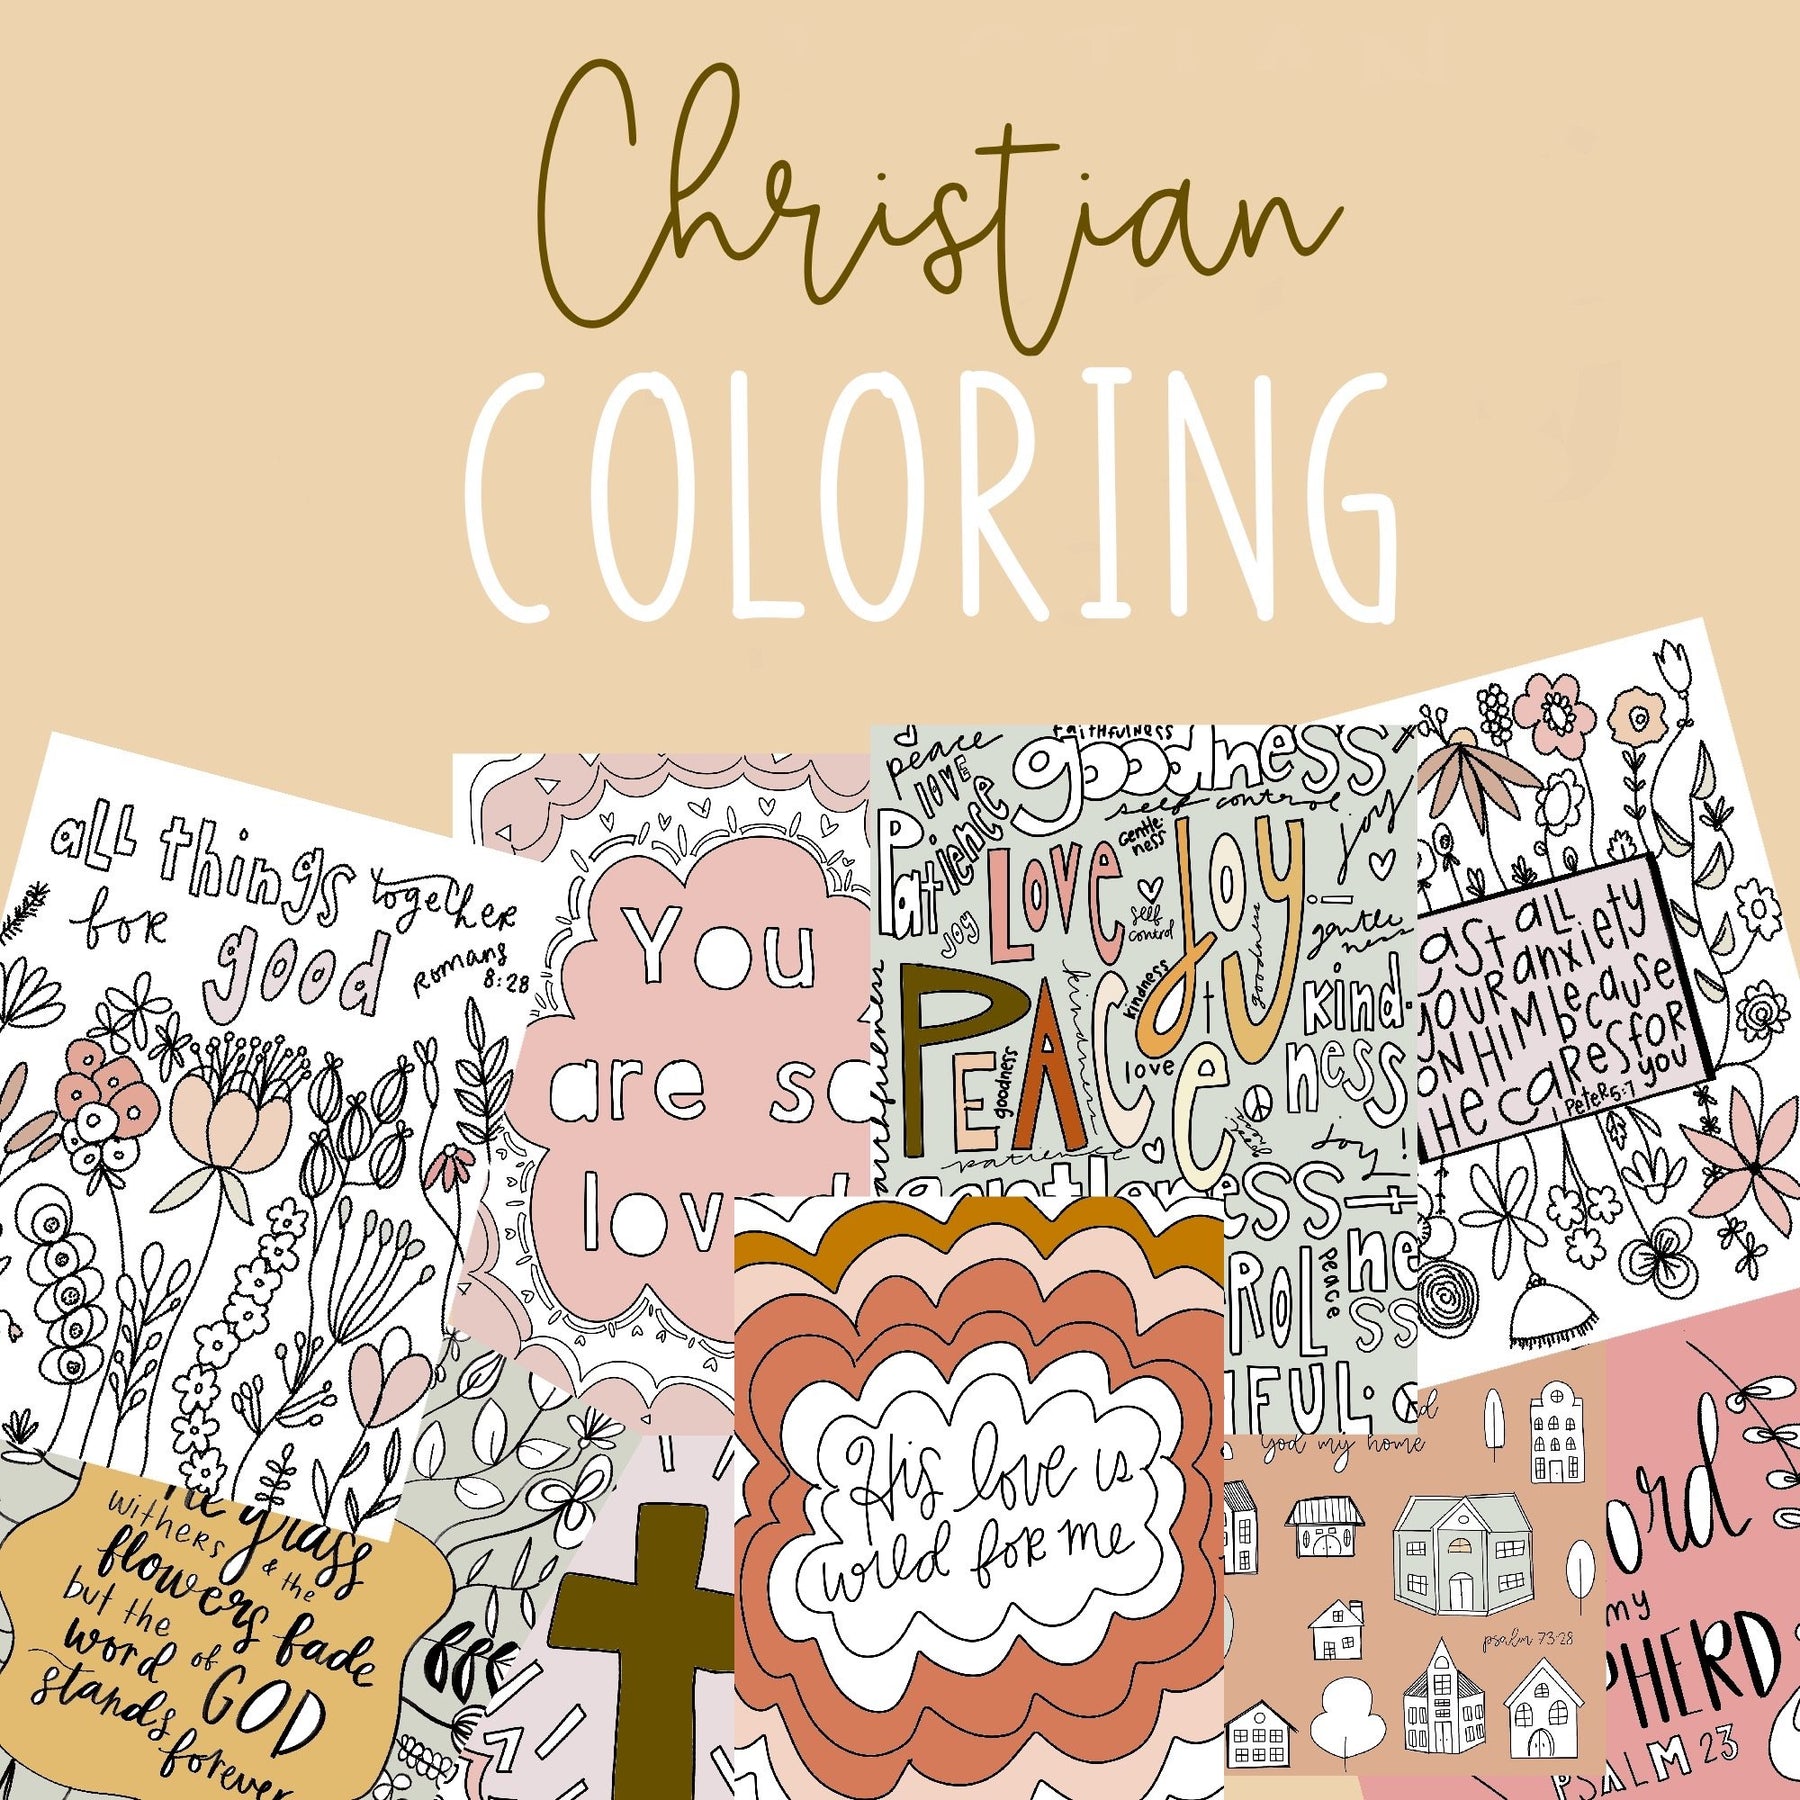 20+ Best Procreate Coloring Pages